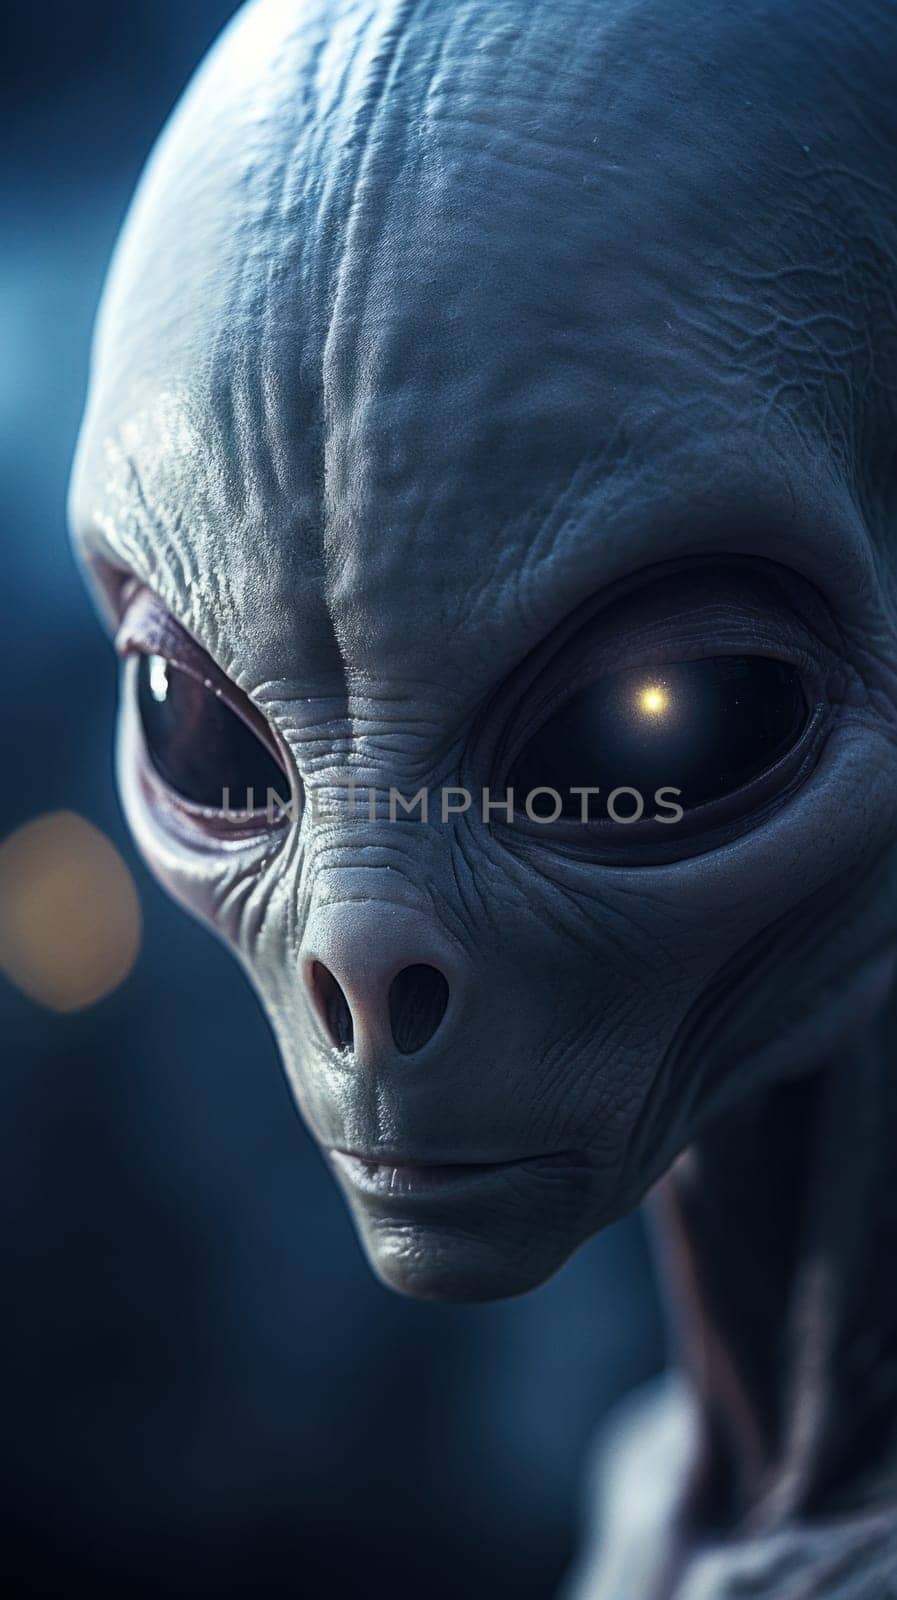 A close up of a alien looking face with glowing eyes